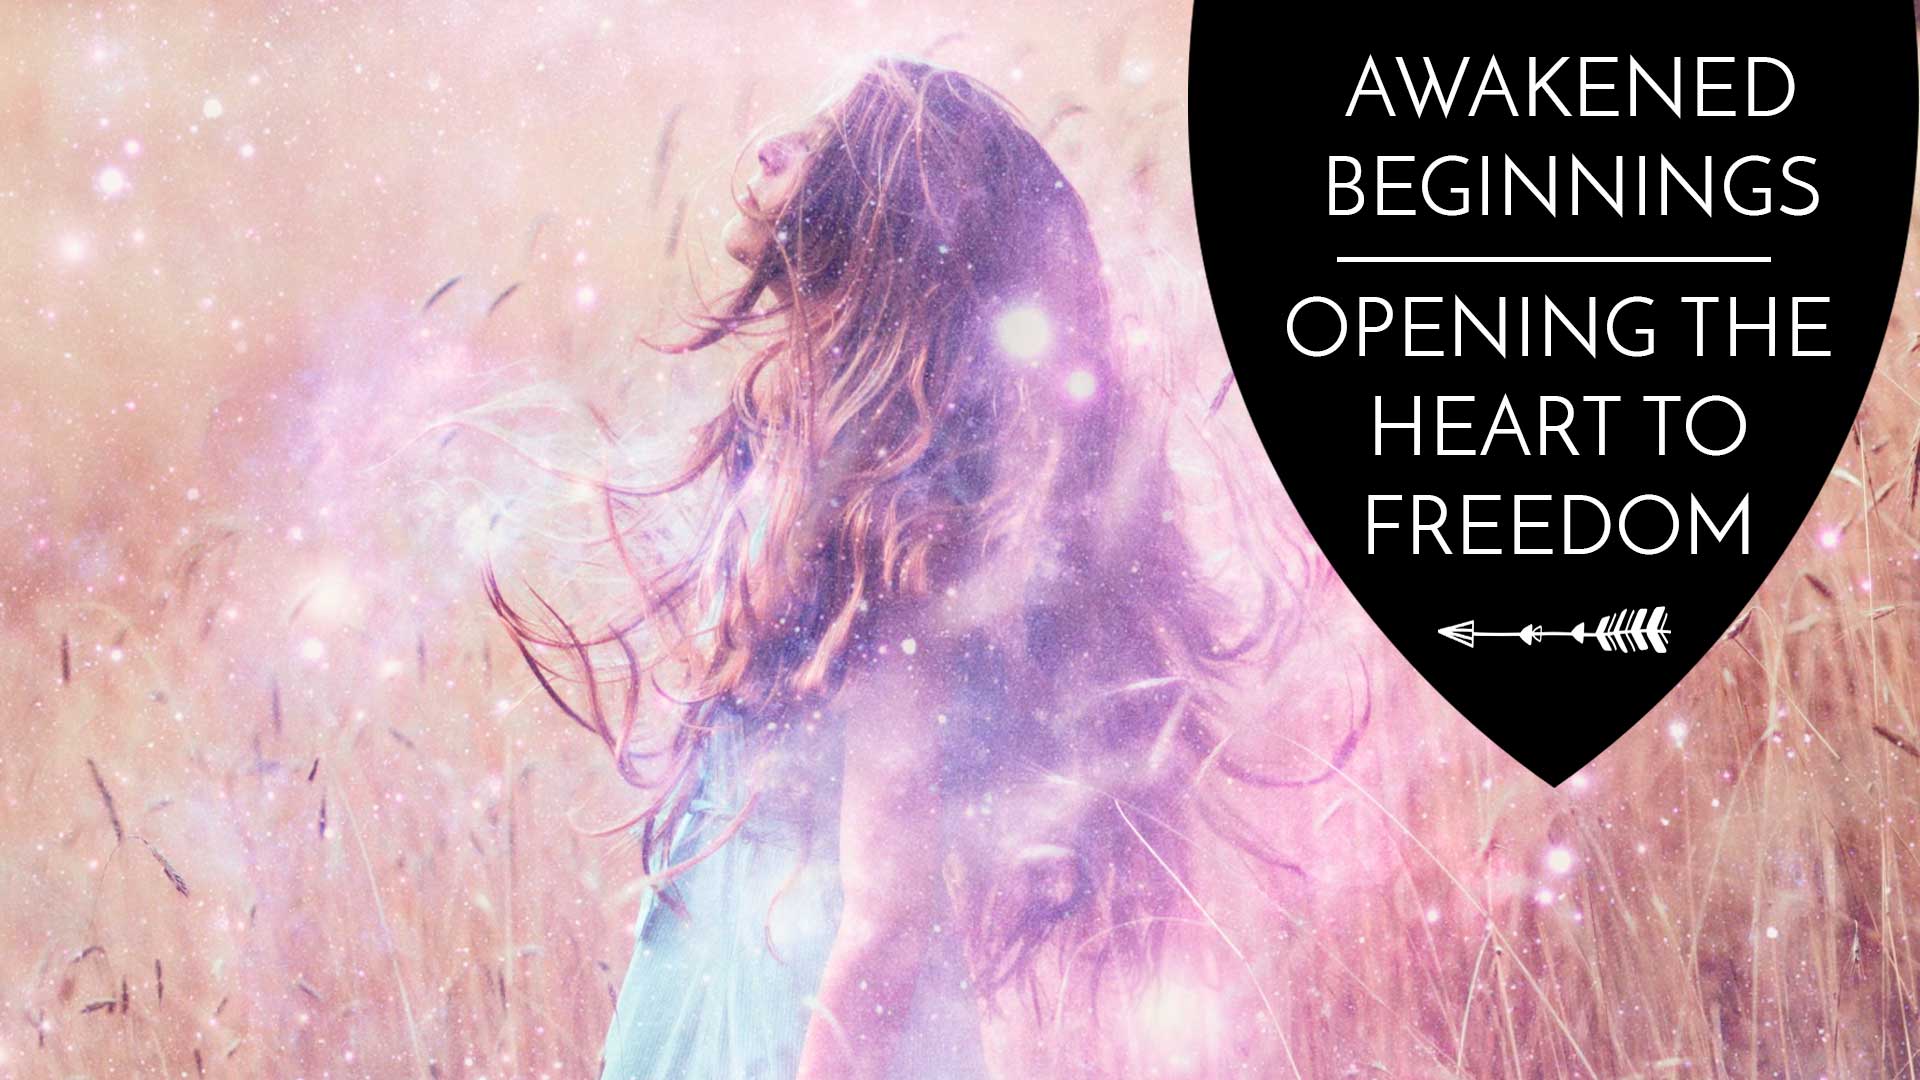 Continuing with our Awakened Beginnings series, I'd like to spend some time talking about self-acceptance and self-worth. During the Beginning of our awakening experiences, we will suddenly be catapulted into a resistance of all of our personal self-worth issues. A core focus on what we feel during the initial stages of awakening is really about opening the heart.